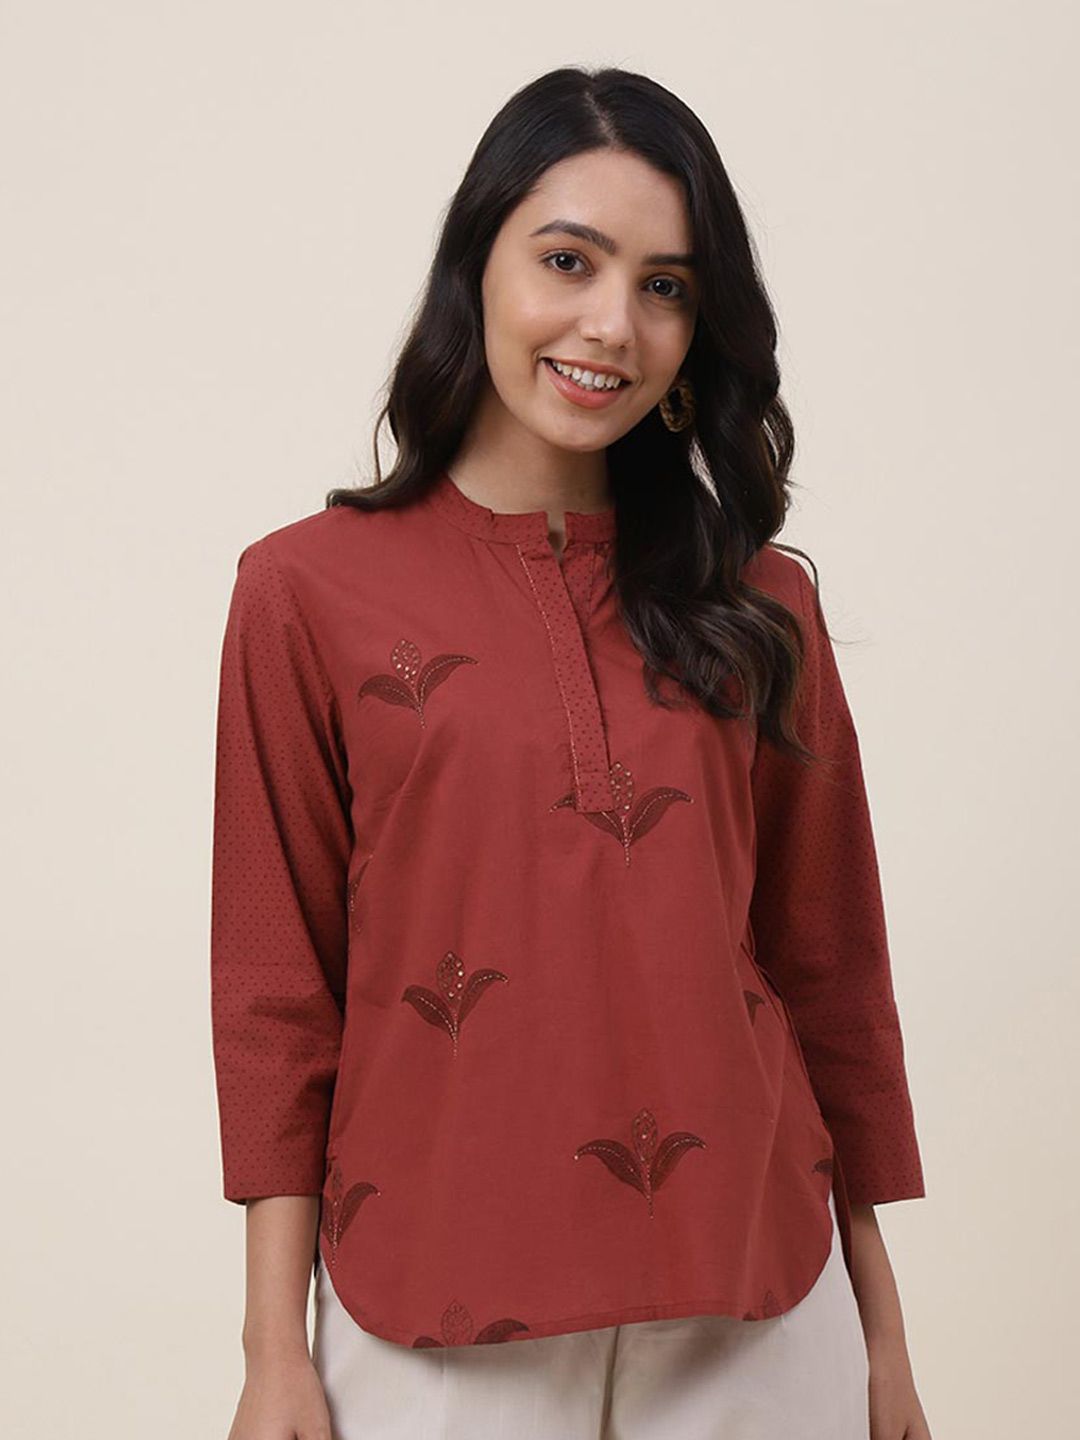 Fabindia Maroon Floral Print Tie-Up Neck Pure Cotton Top Price in India